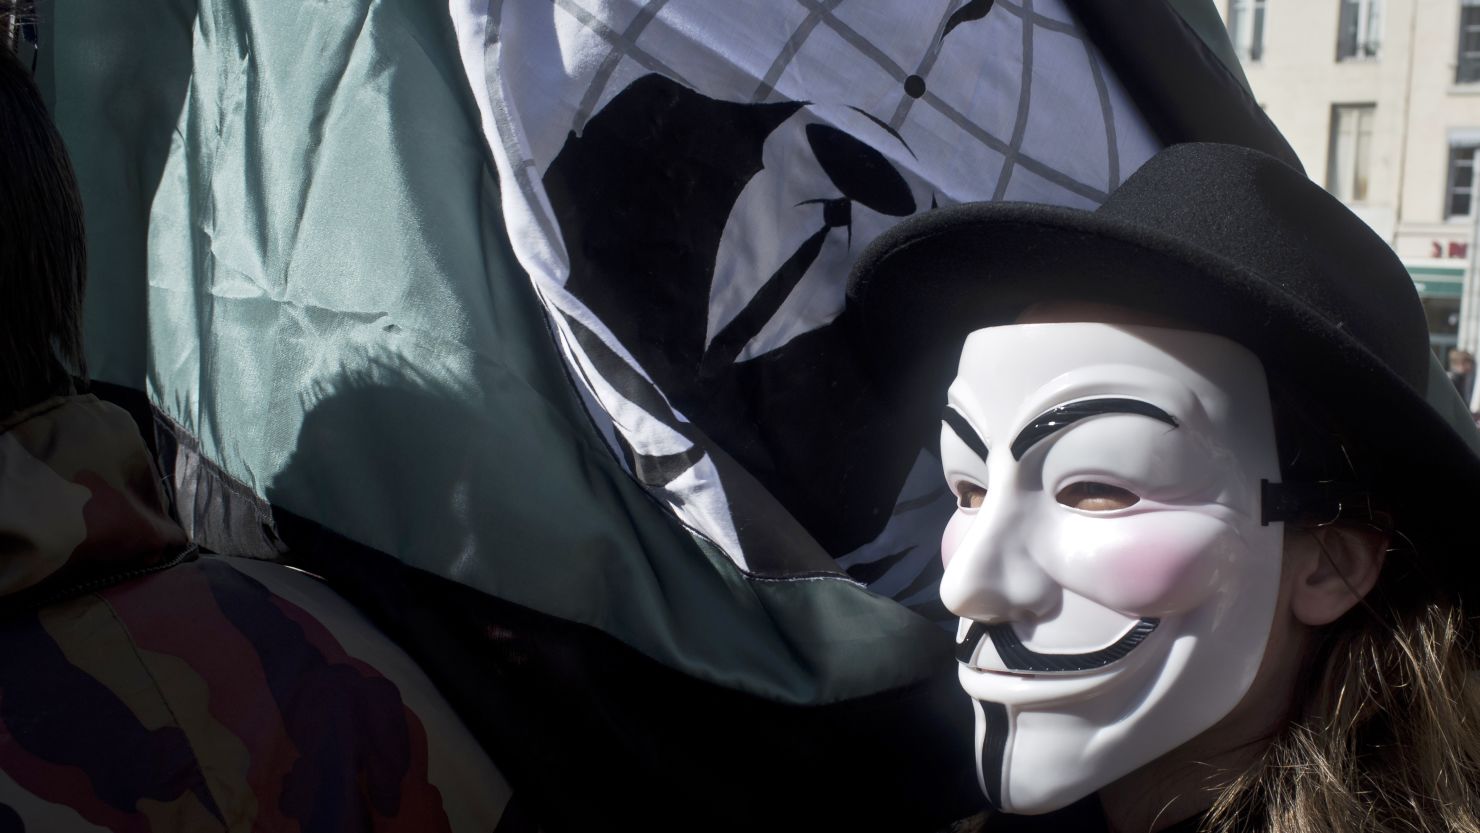 A protester wears an Anonymous mask to a rally in France.